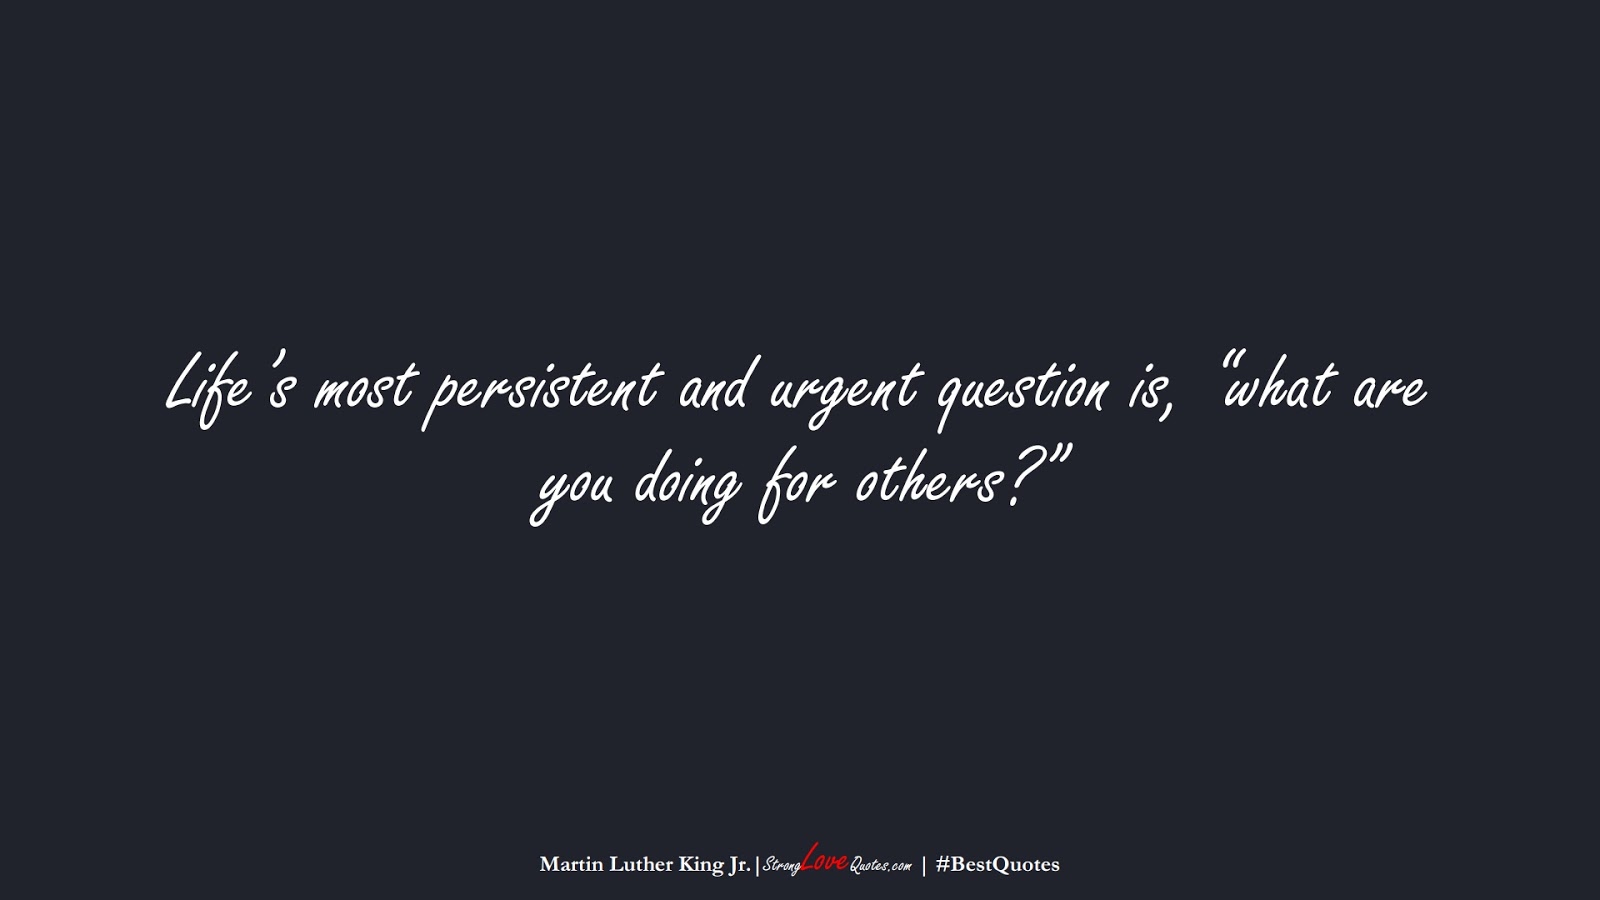 Life’s most persistent and urgent question is, “what are you doing for others?” (Martin Luther King Jr.);  #BestQuotes